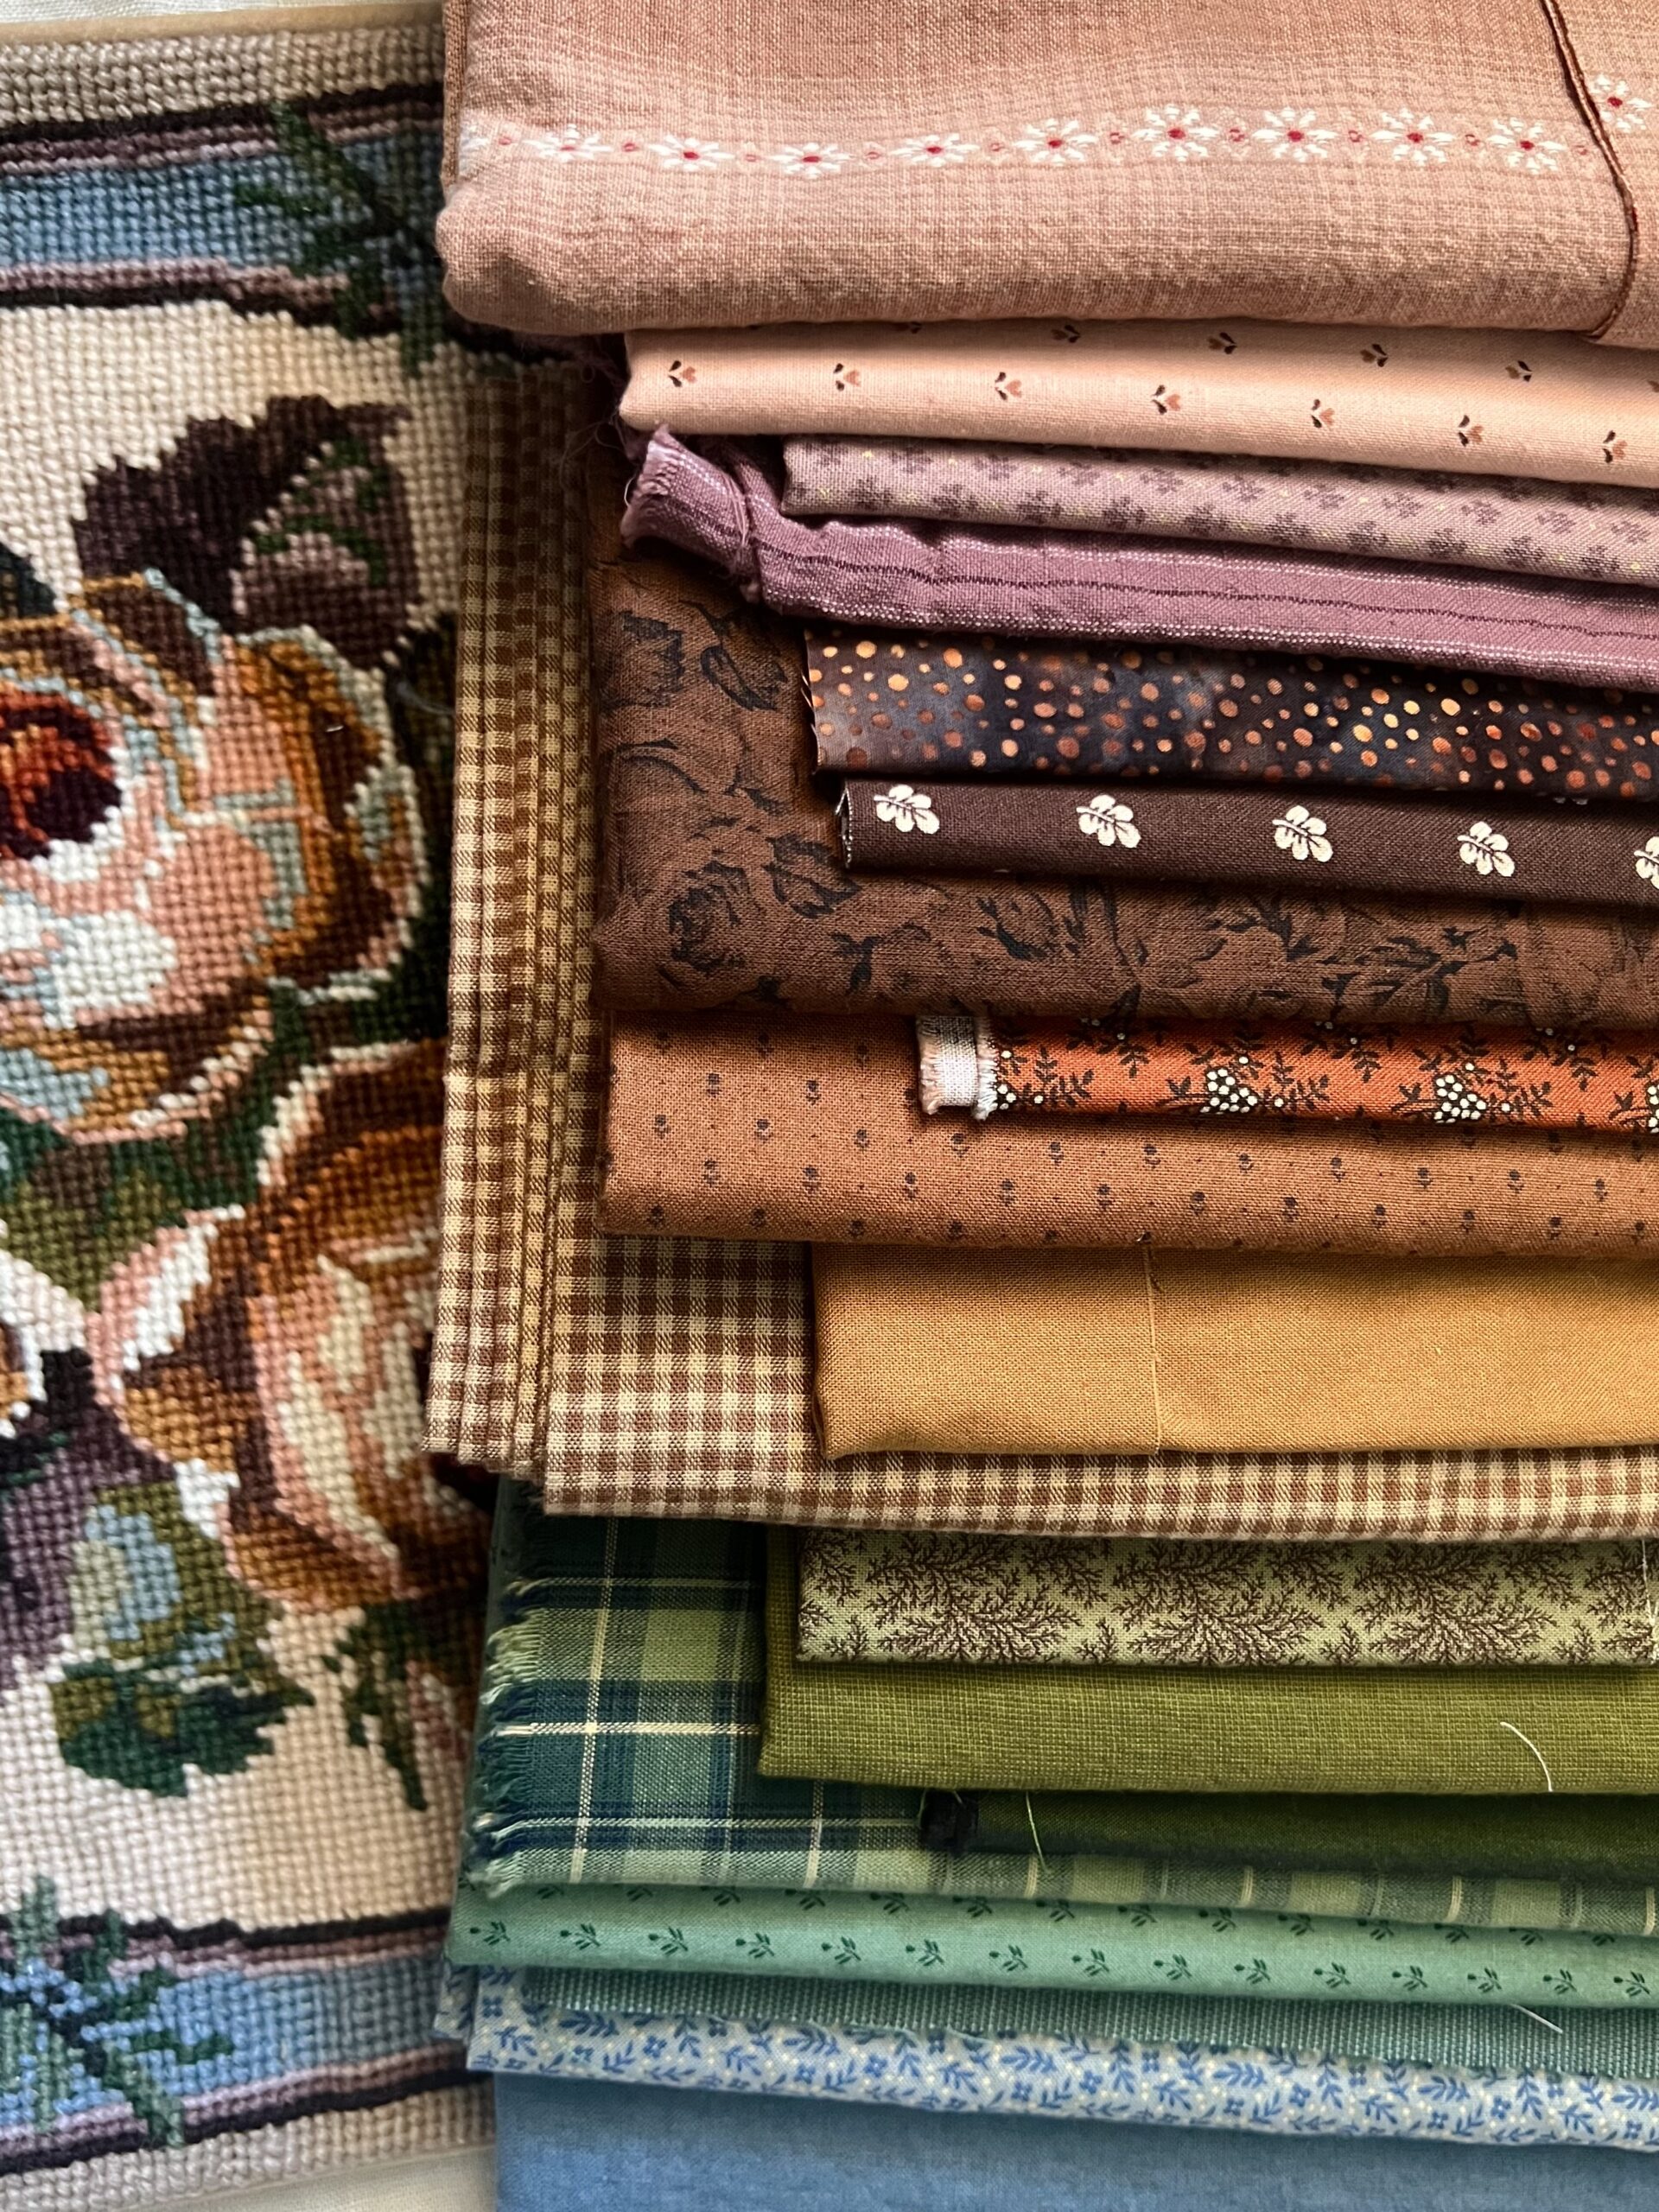 Choosing Fabrics For Your Quilt